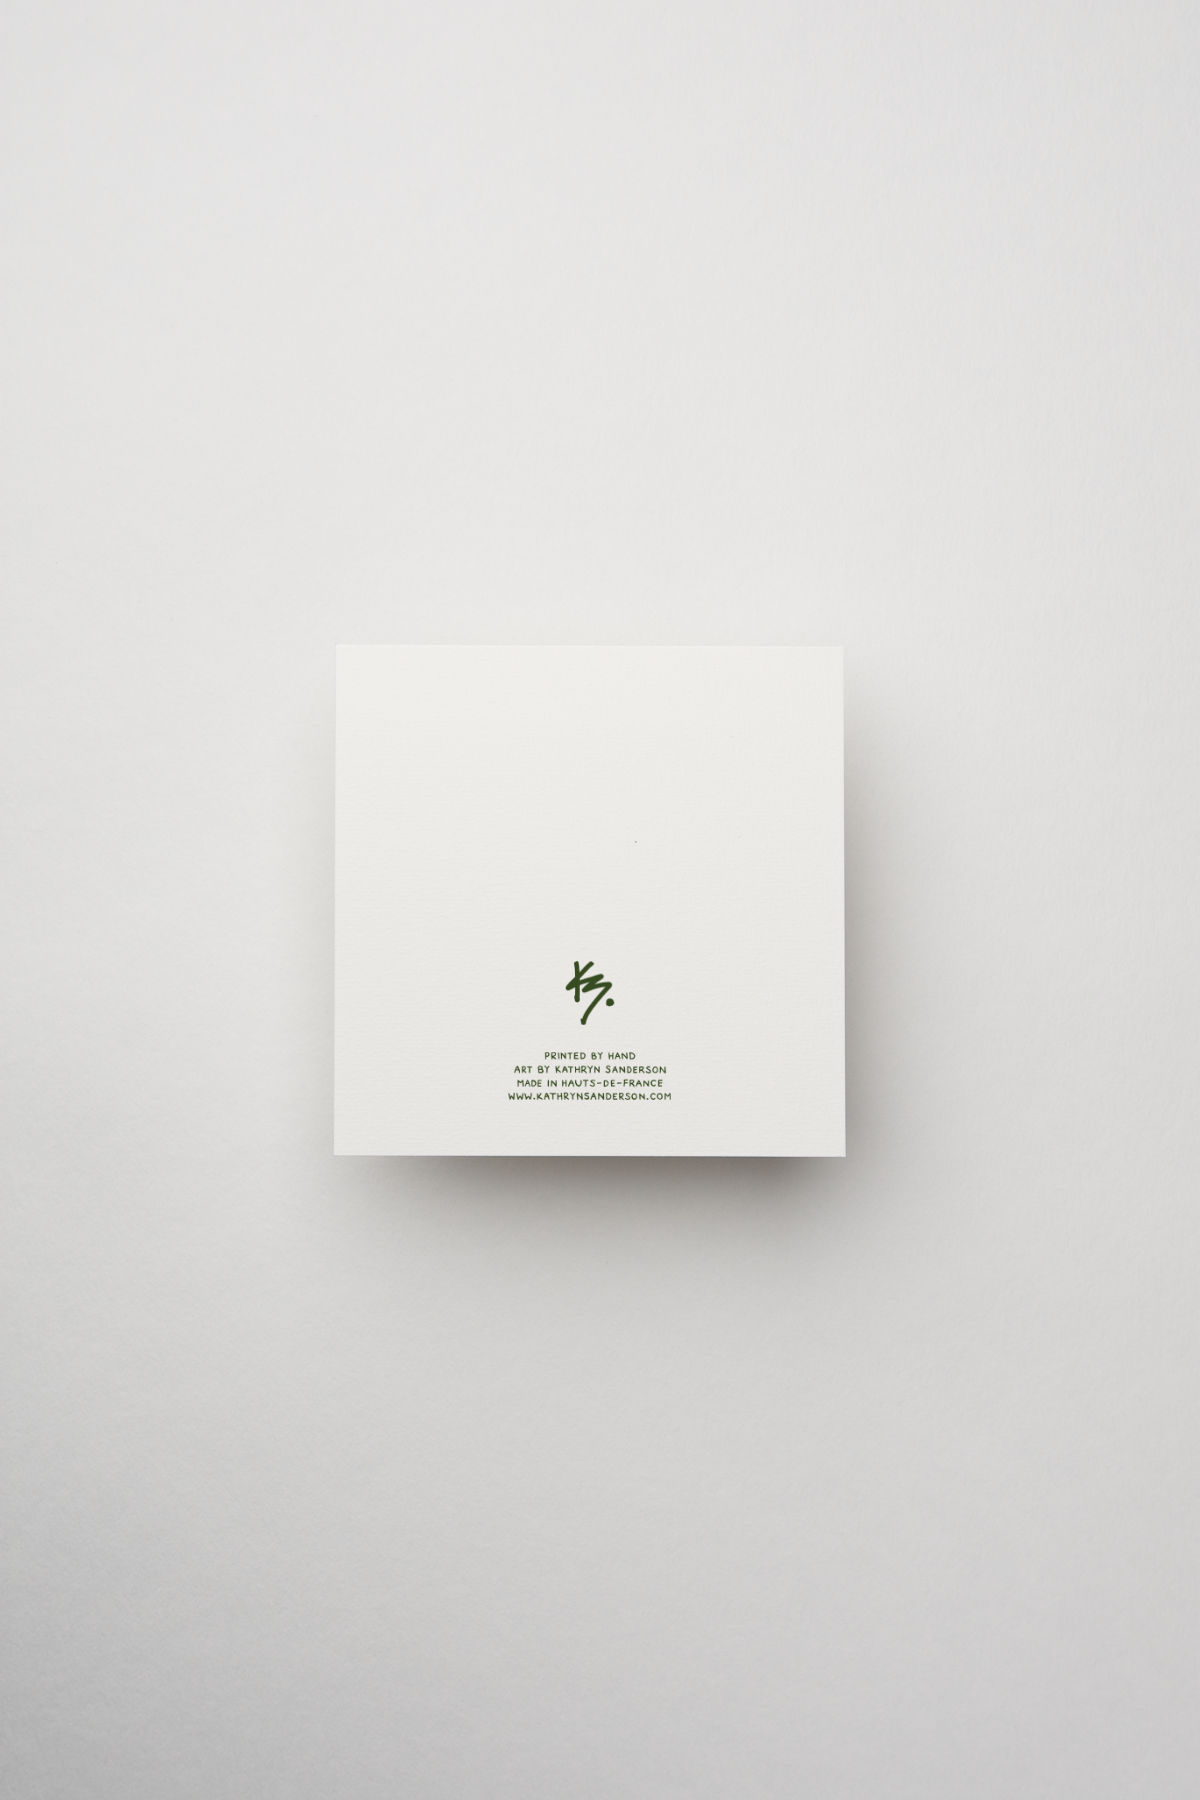 Image of back of Kathryn Sanderson's greetings card "Le Coq" in Leaf Green